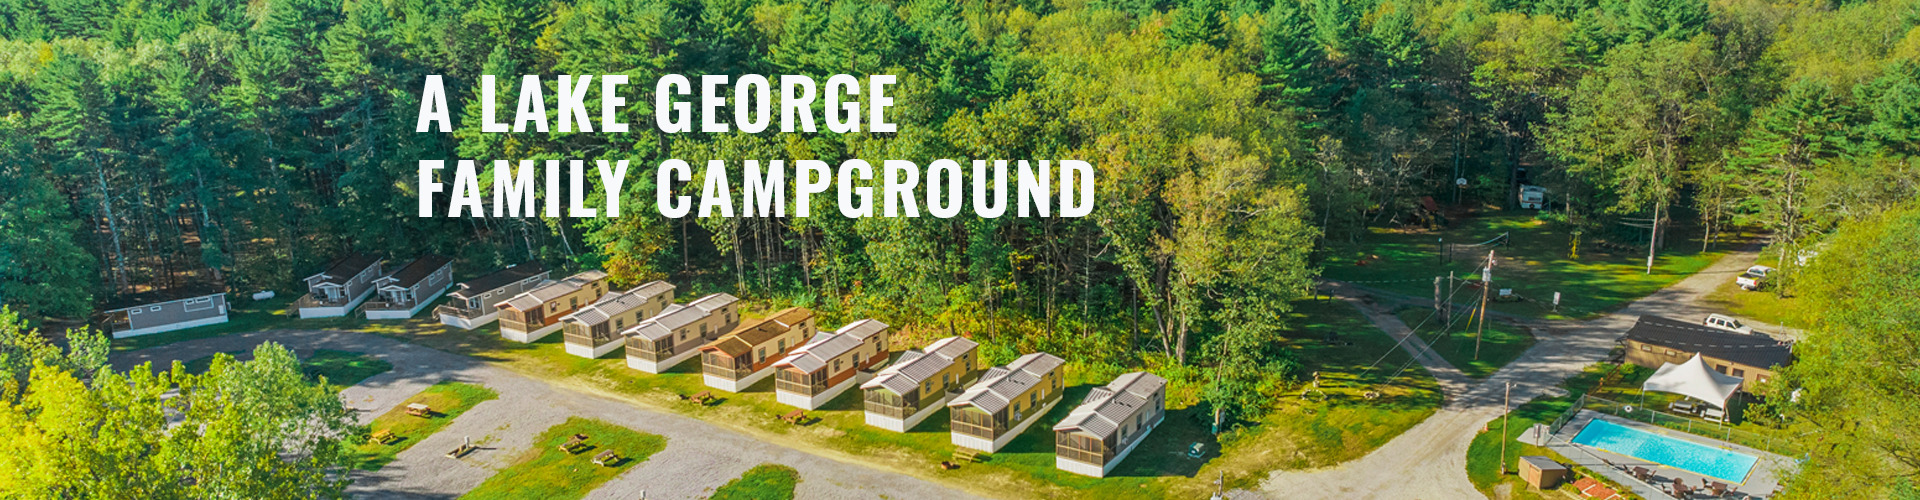 aerial photo of campground with text overlay "A Lake George Family Campground"